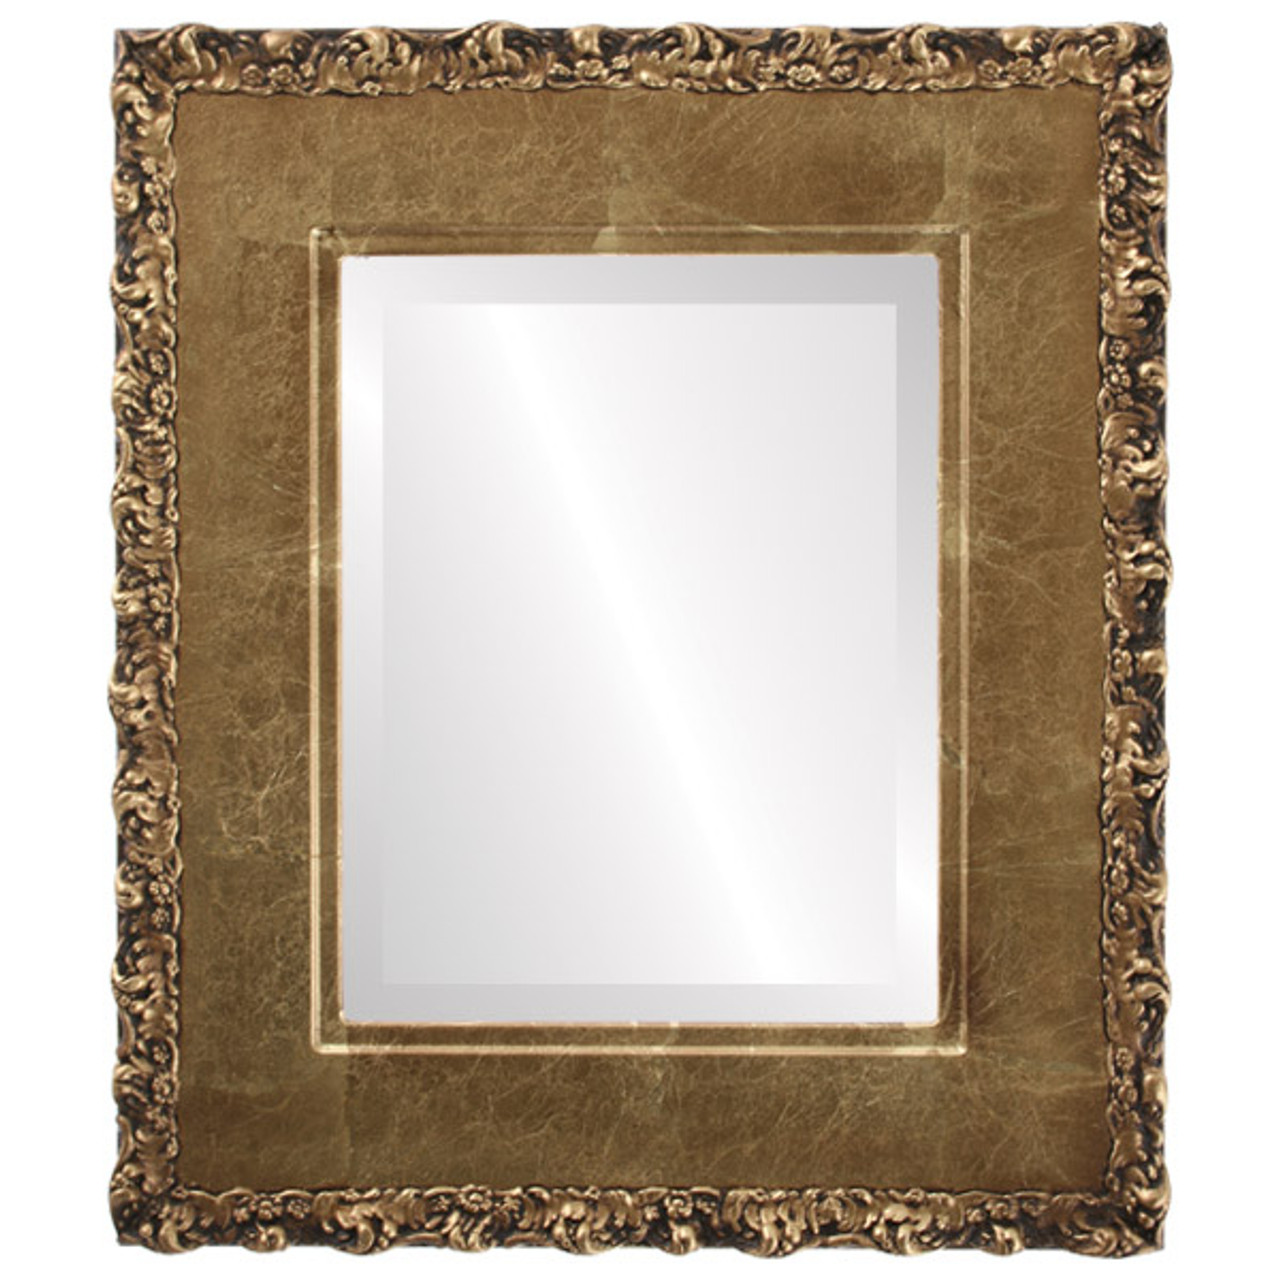 Antique Gold Rectangle Mirrors from $153 Free Shipping